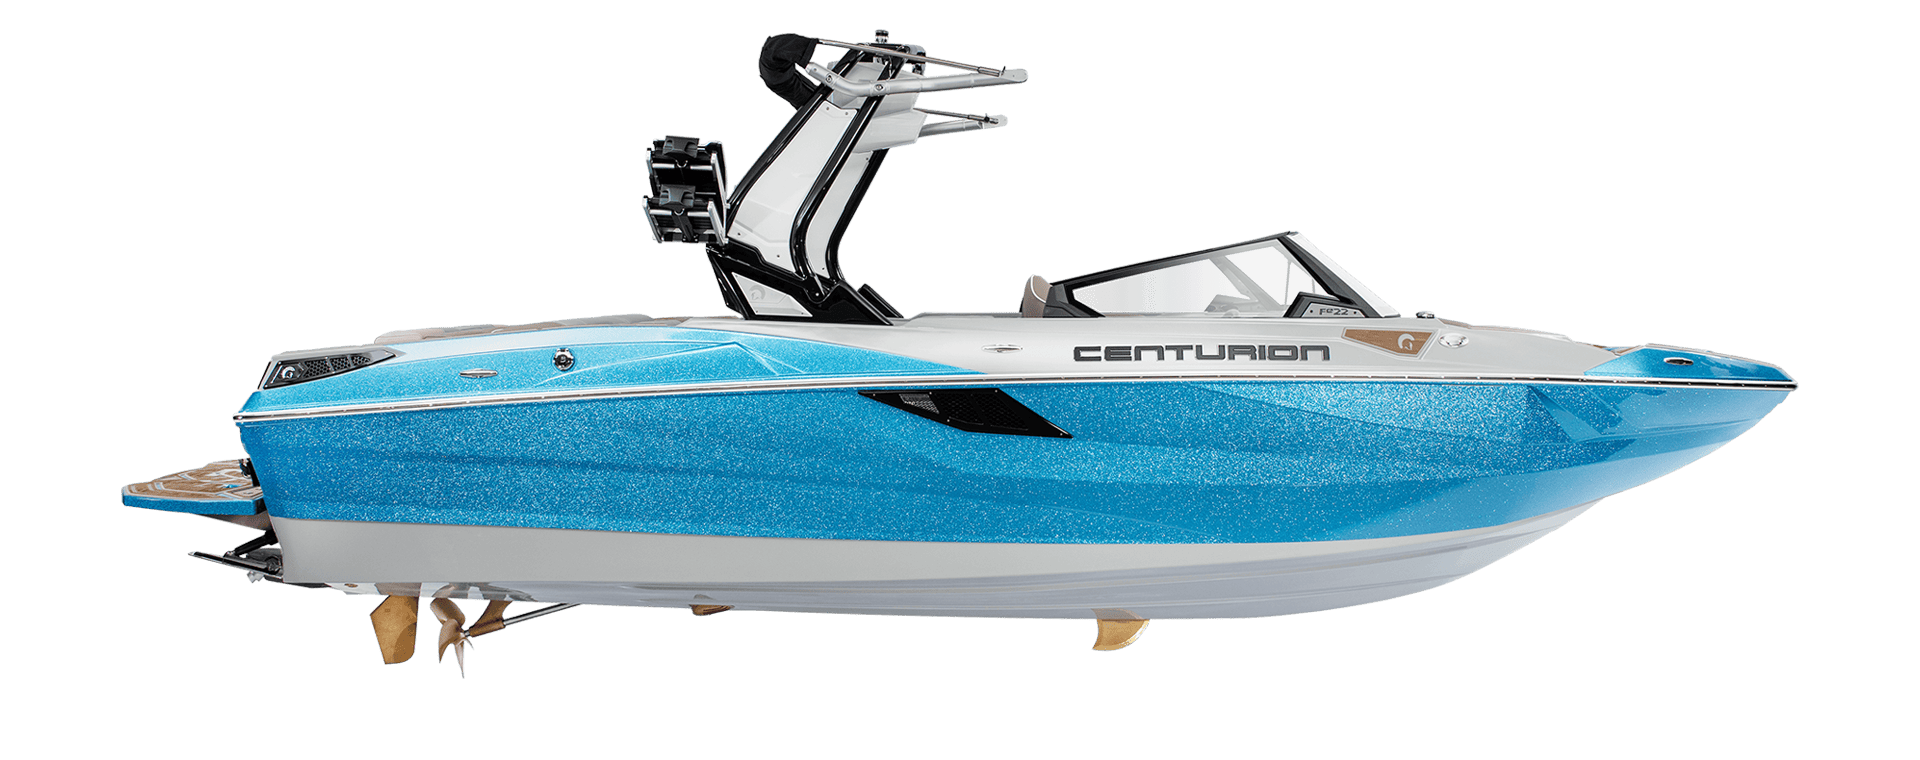 A blue and white Centurion Fe Series boat with a sleek design is showcased against a plain background, highlighting its modern wakeboard towers and polished exterior.